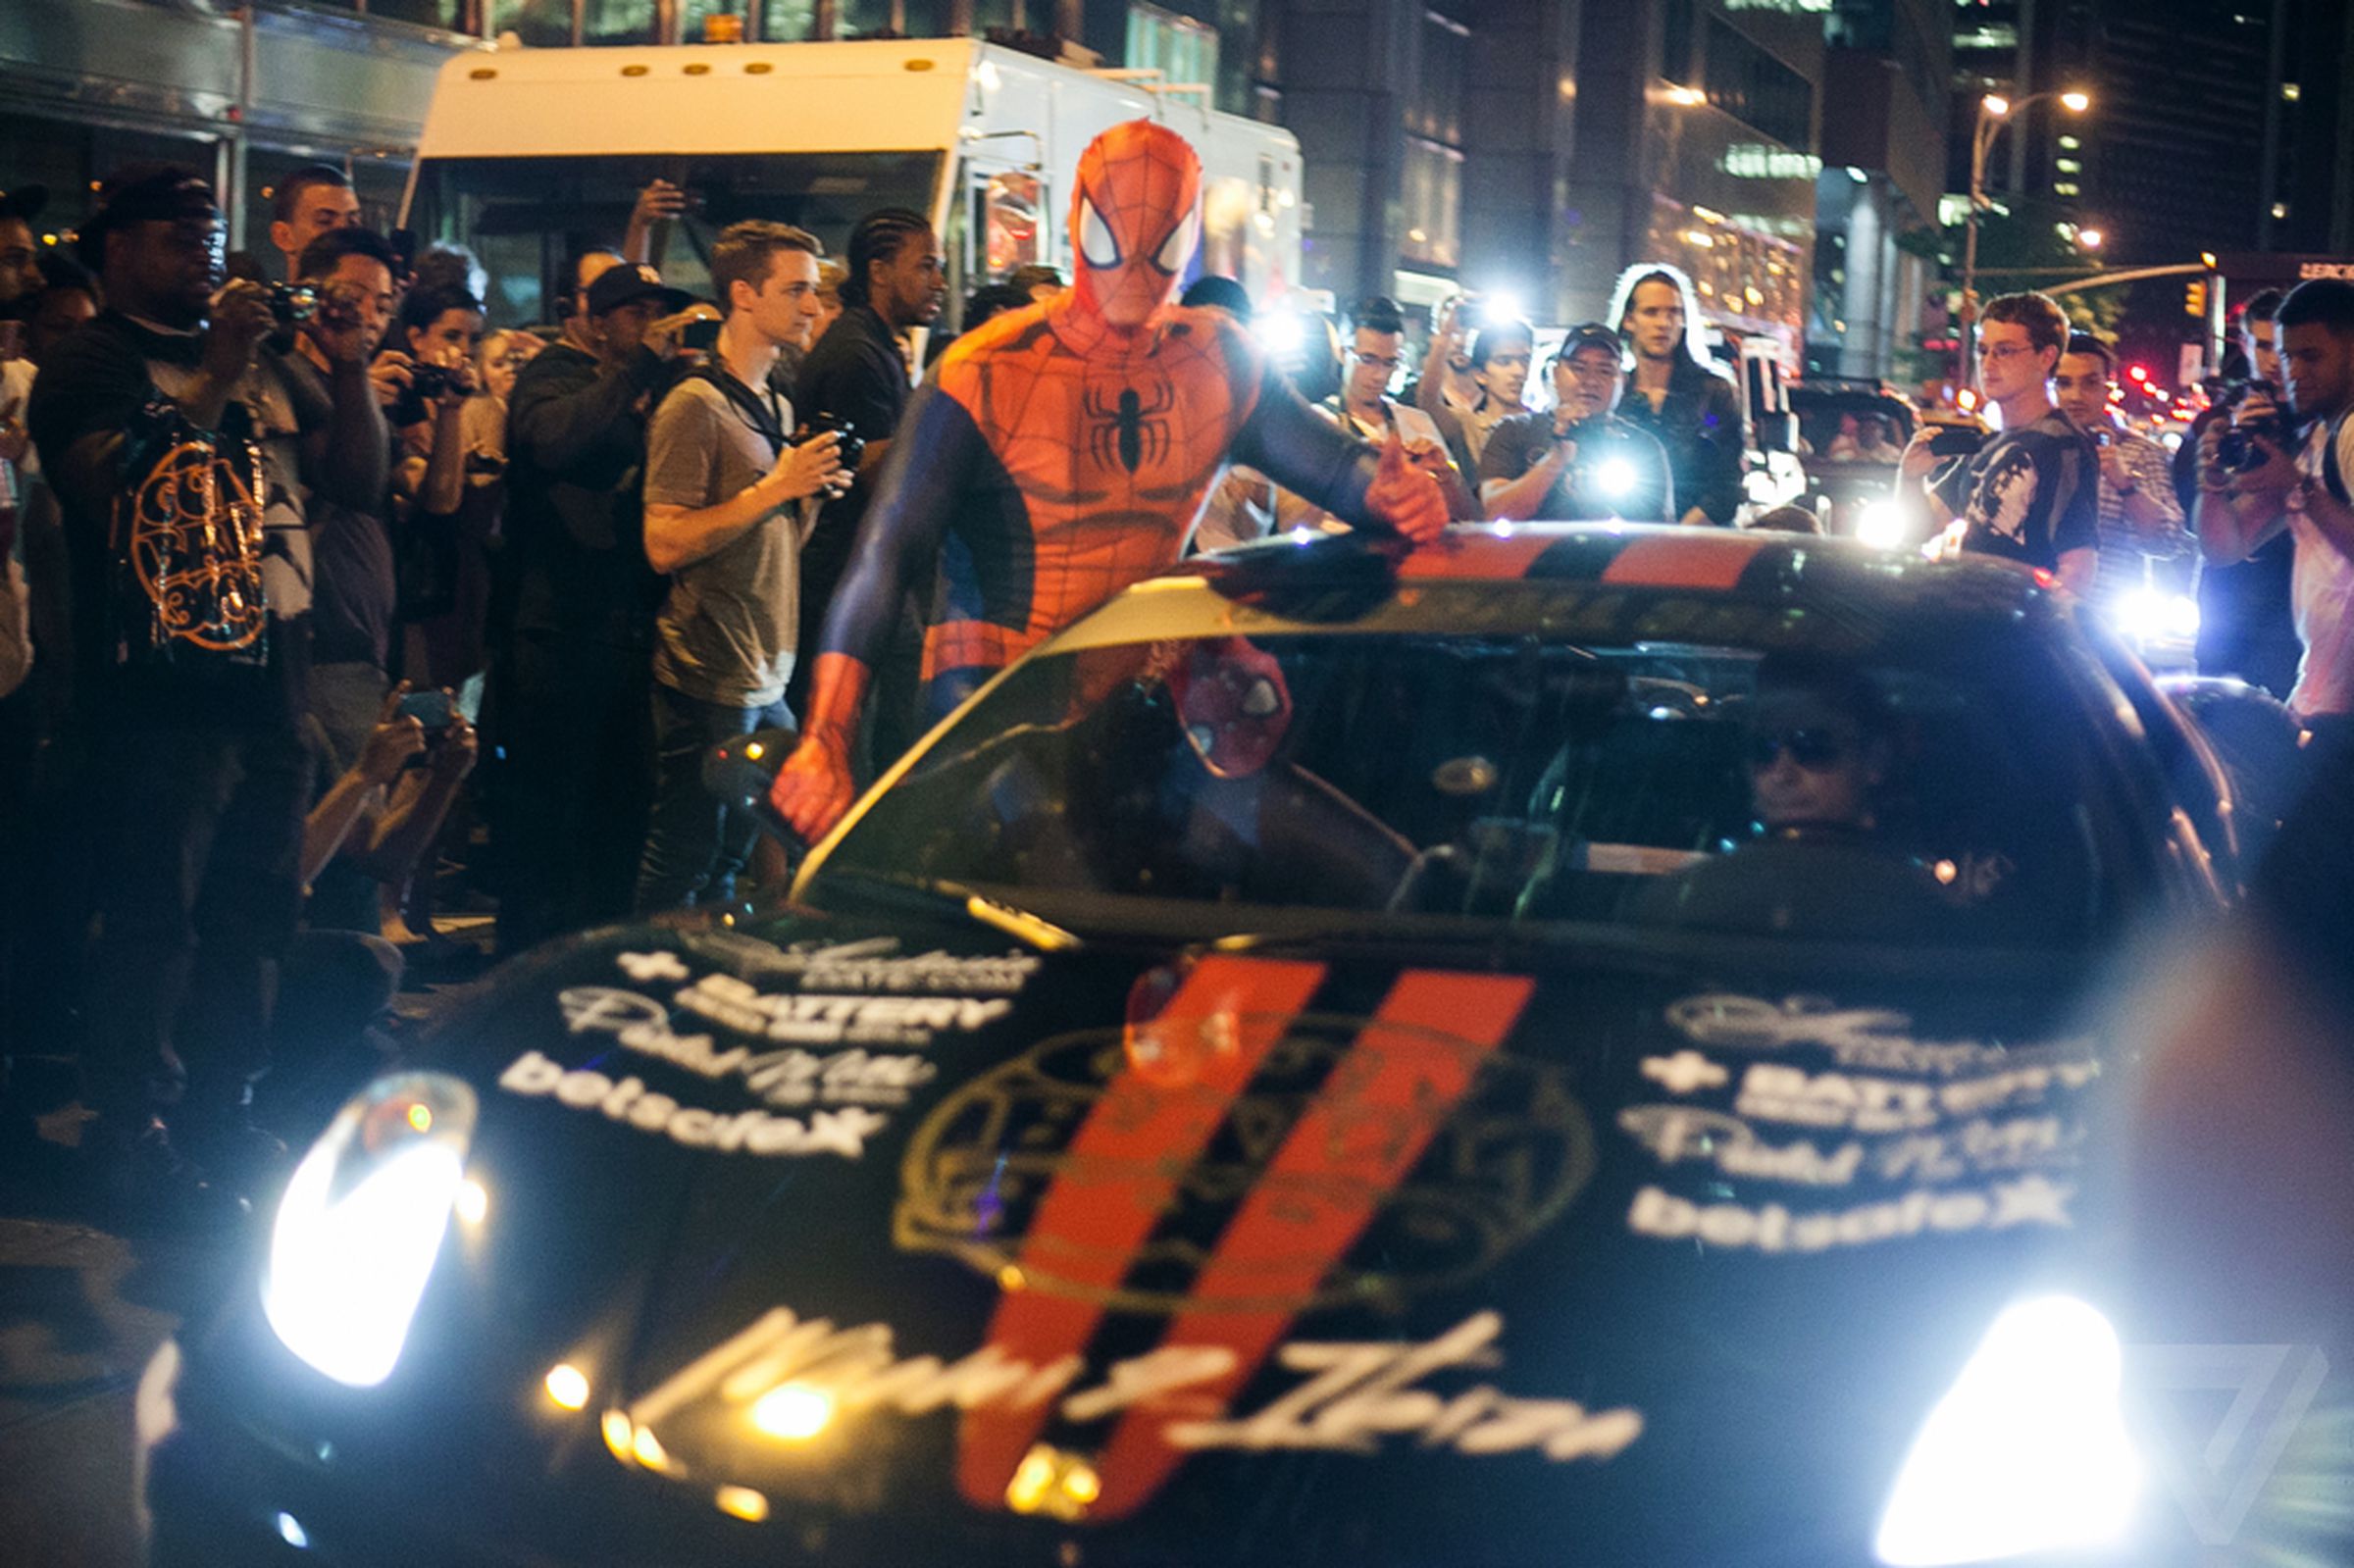 Photos from the Gumball 3000 road rally in New York City